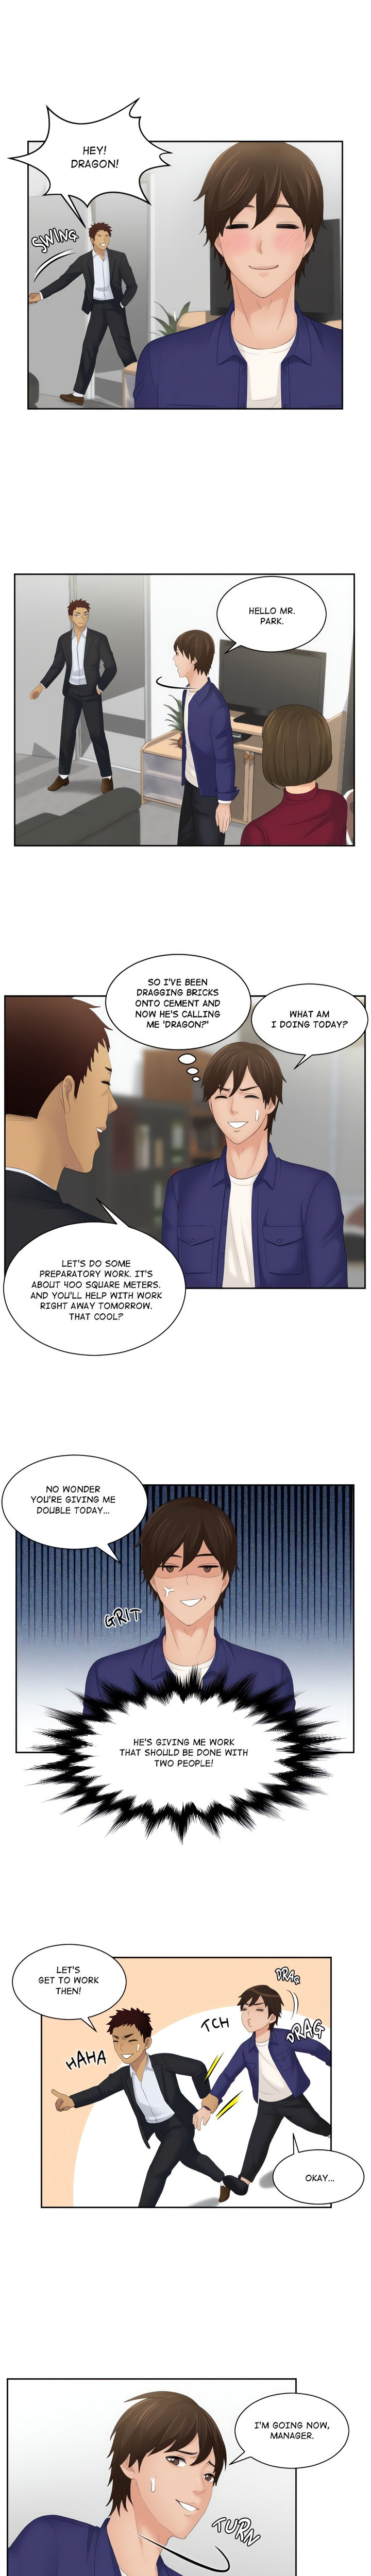 My Love Companion - Chapter 5 Page 4